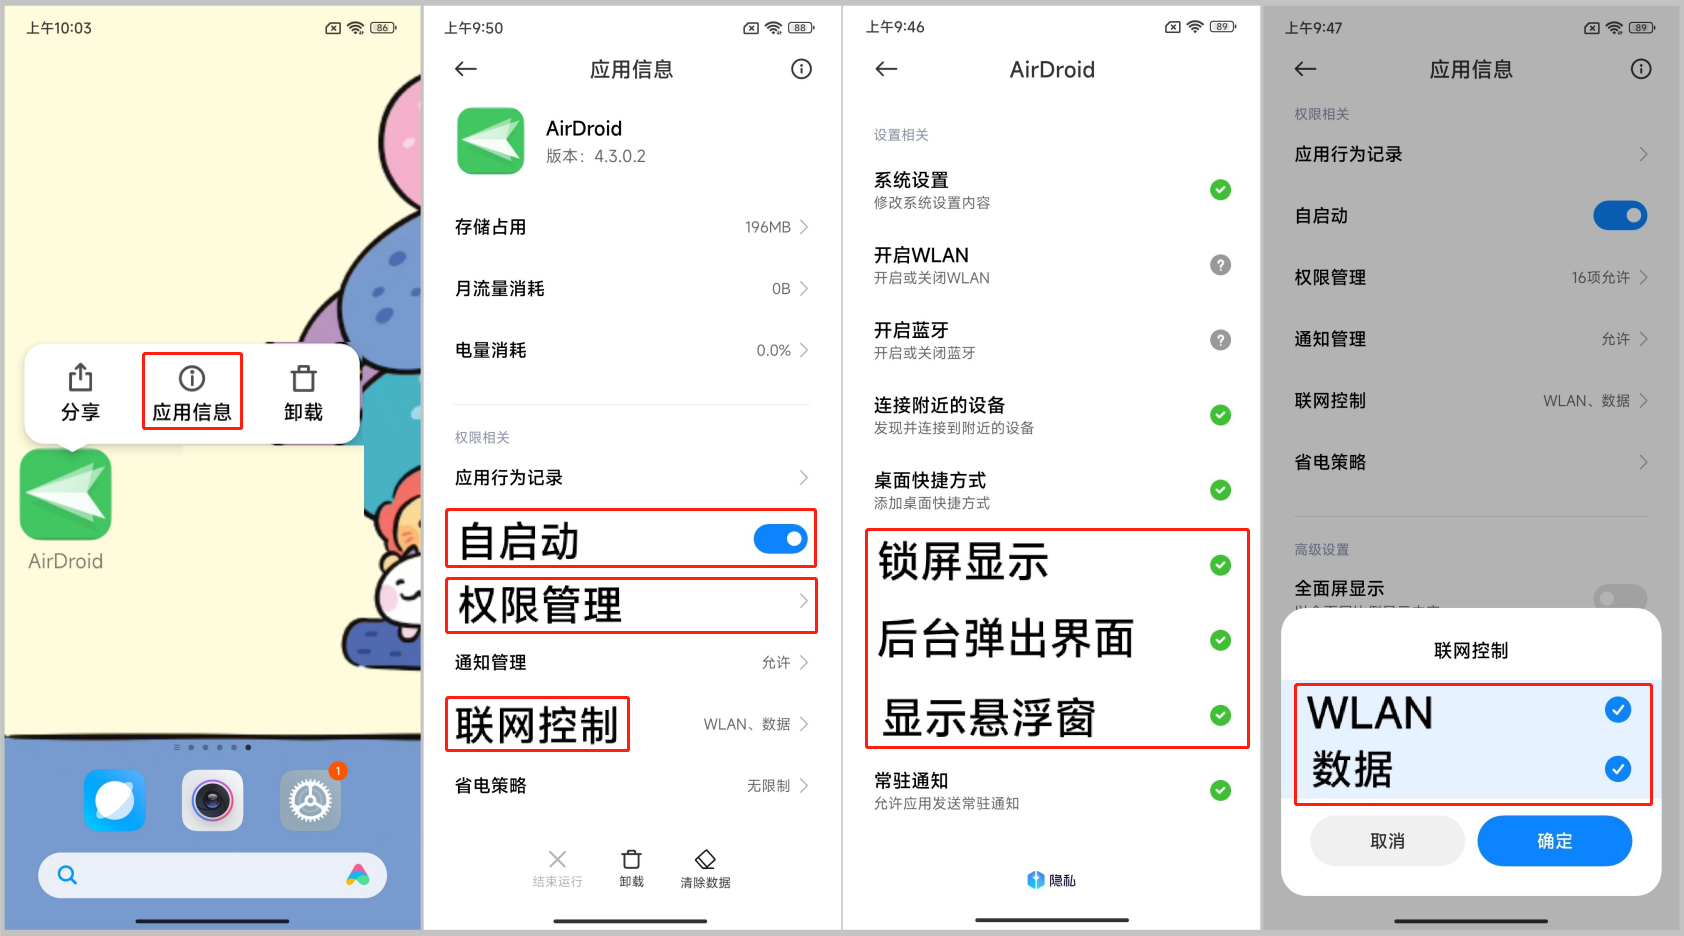 cn-1-Android_12-How_to_keep_AirDroid_running_in_the_background_on_Xiaomi_devices.png